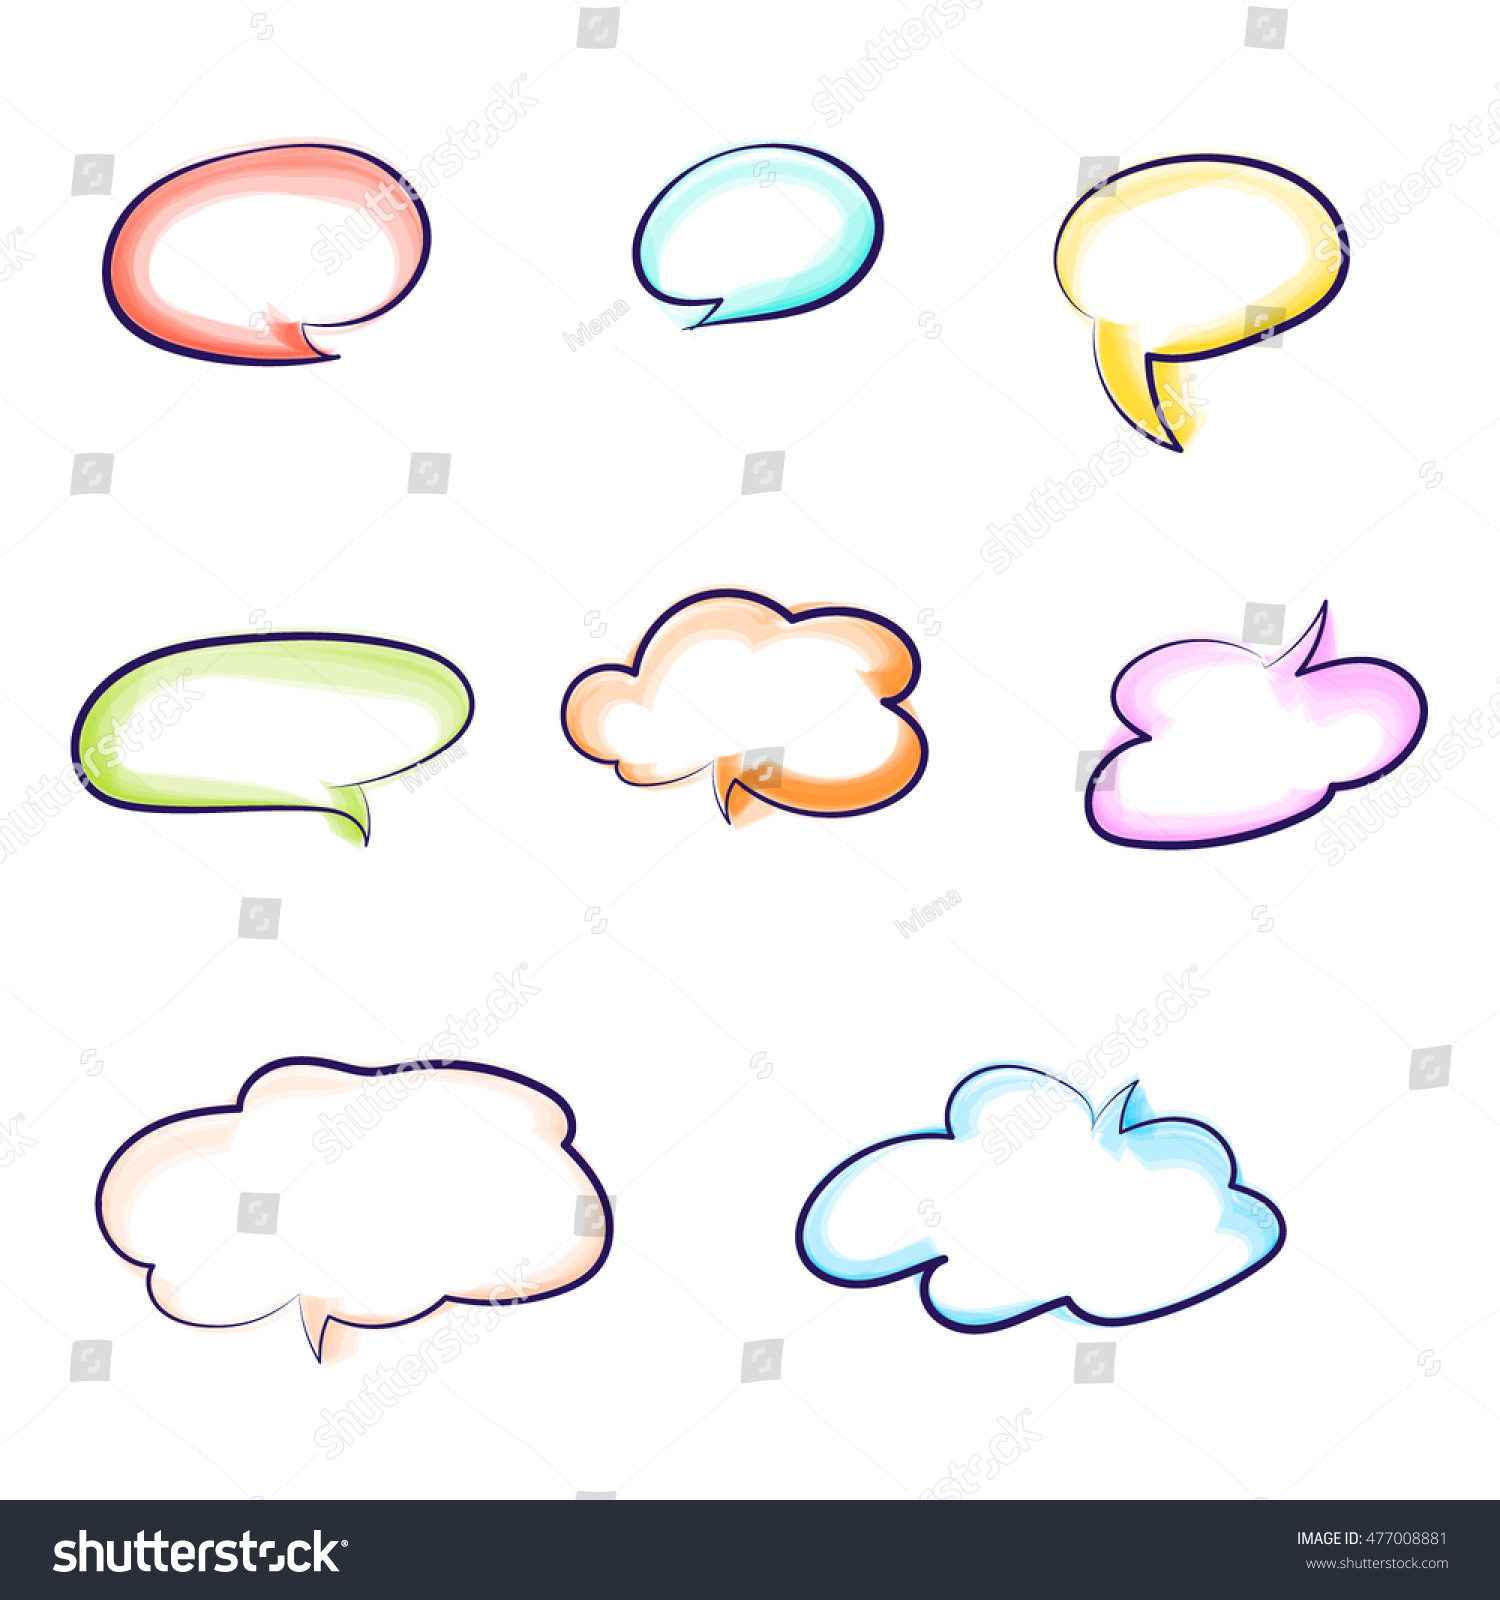 Set Colorful Speech Bubbles On White Stock Vector Royalty Free 477008881 5015